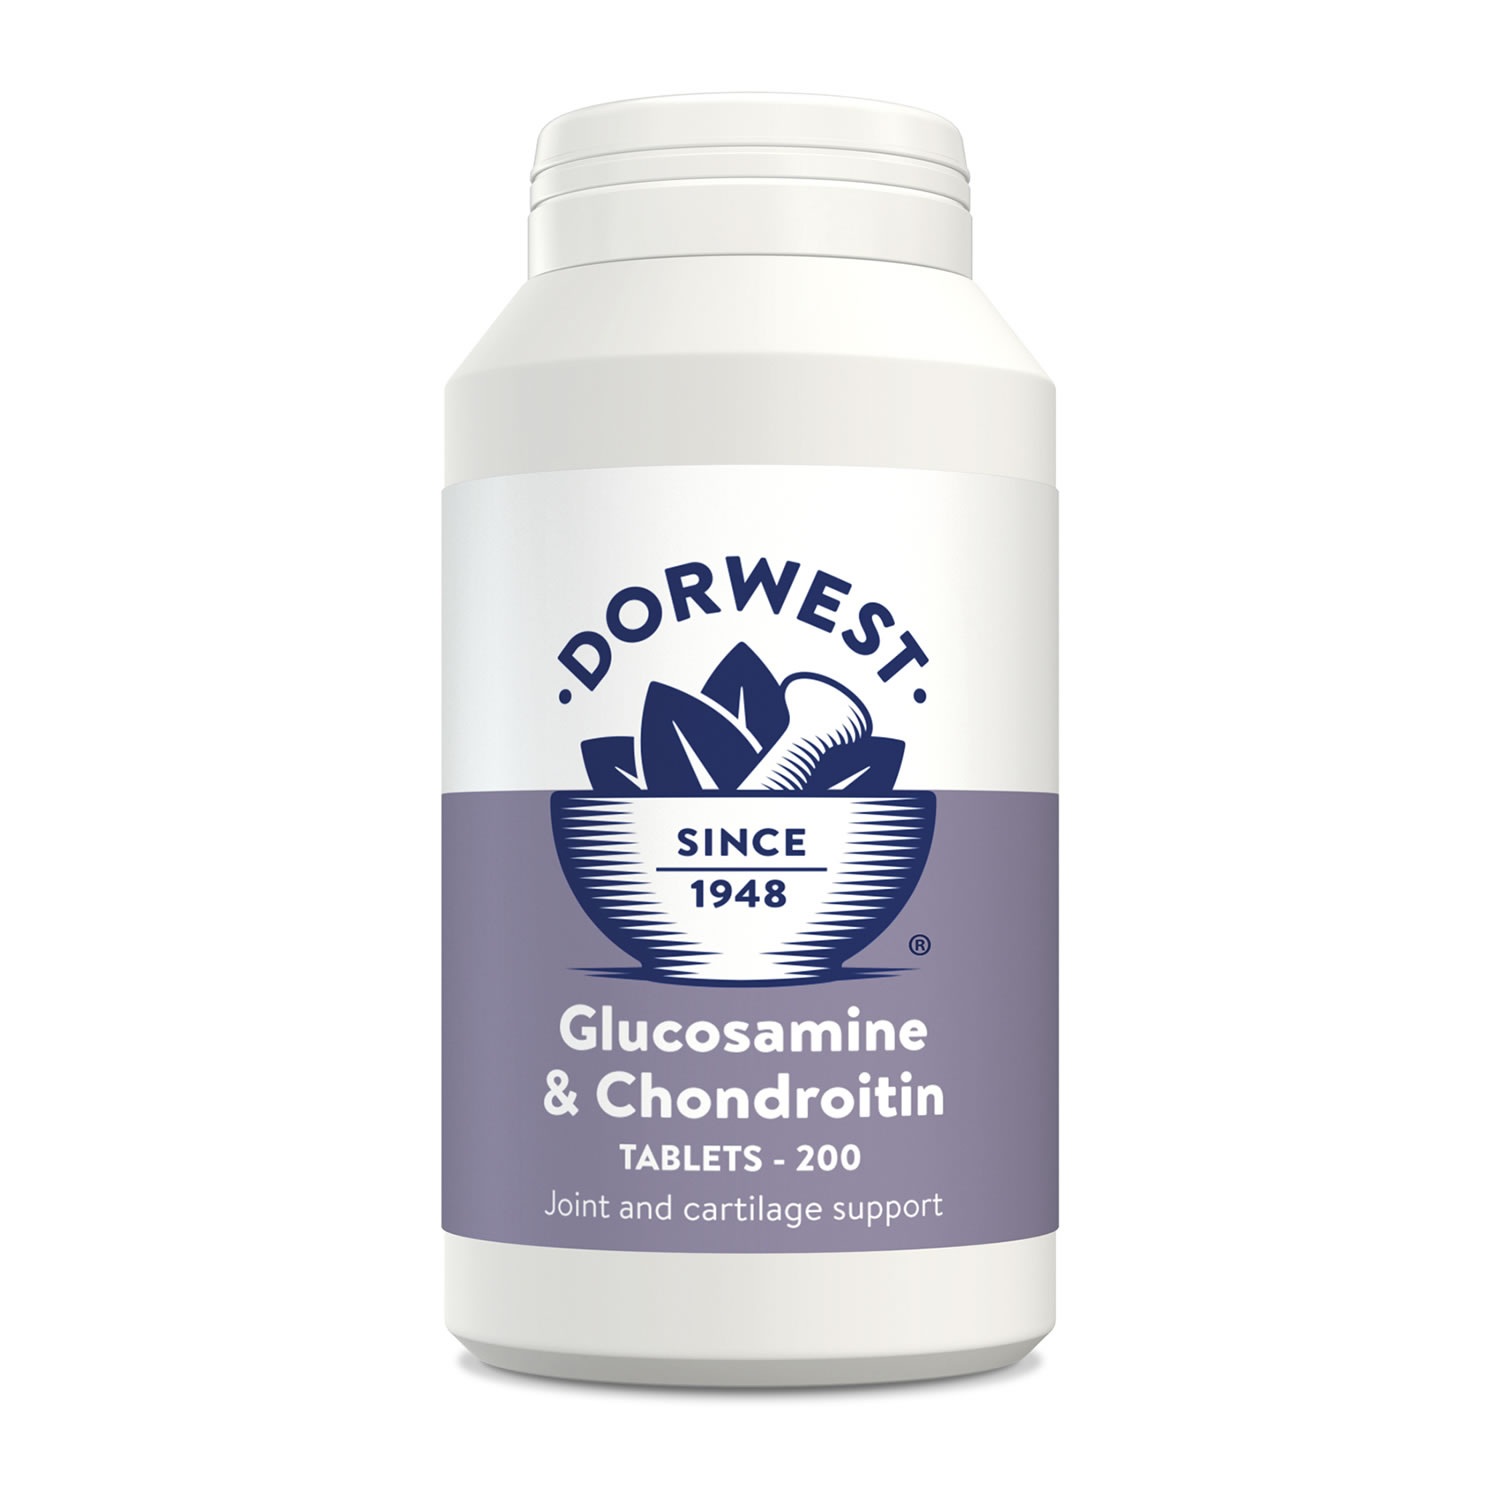 DORWEST HERBS GLUCOSAMINE & CHONDROITIN  200 TABLETS